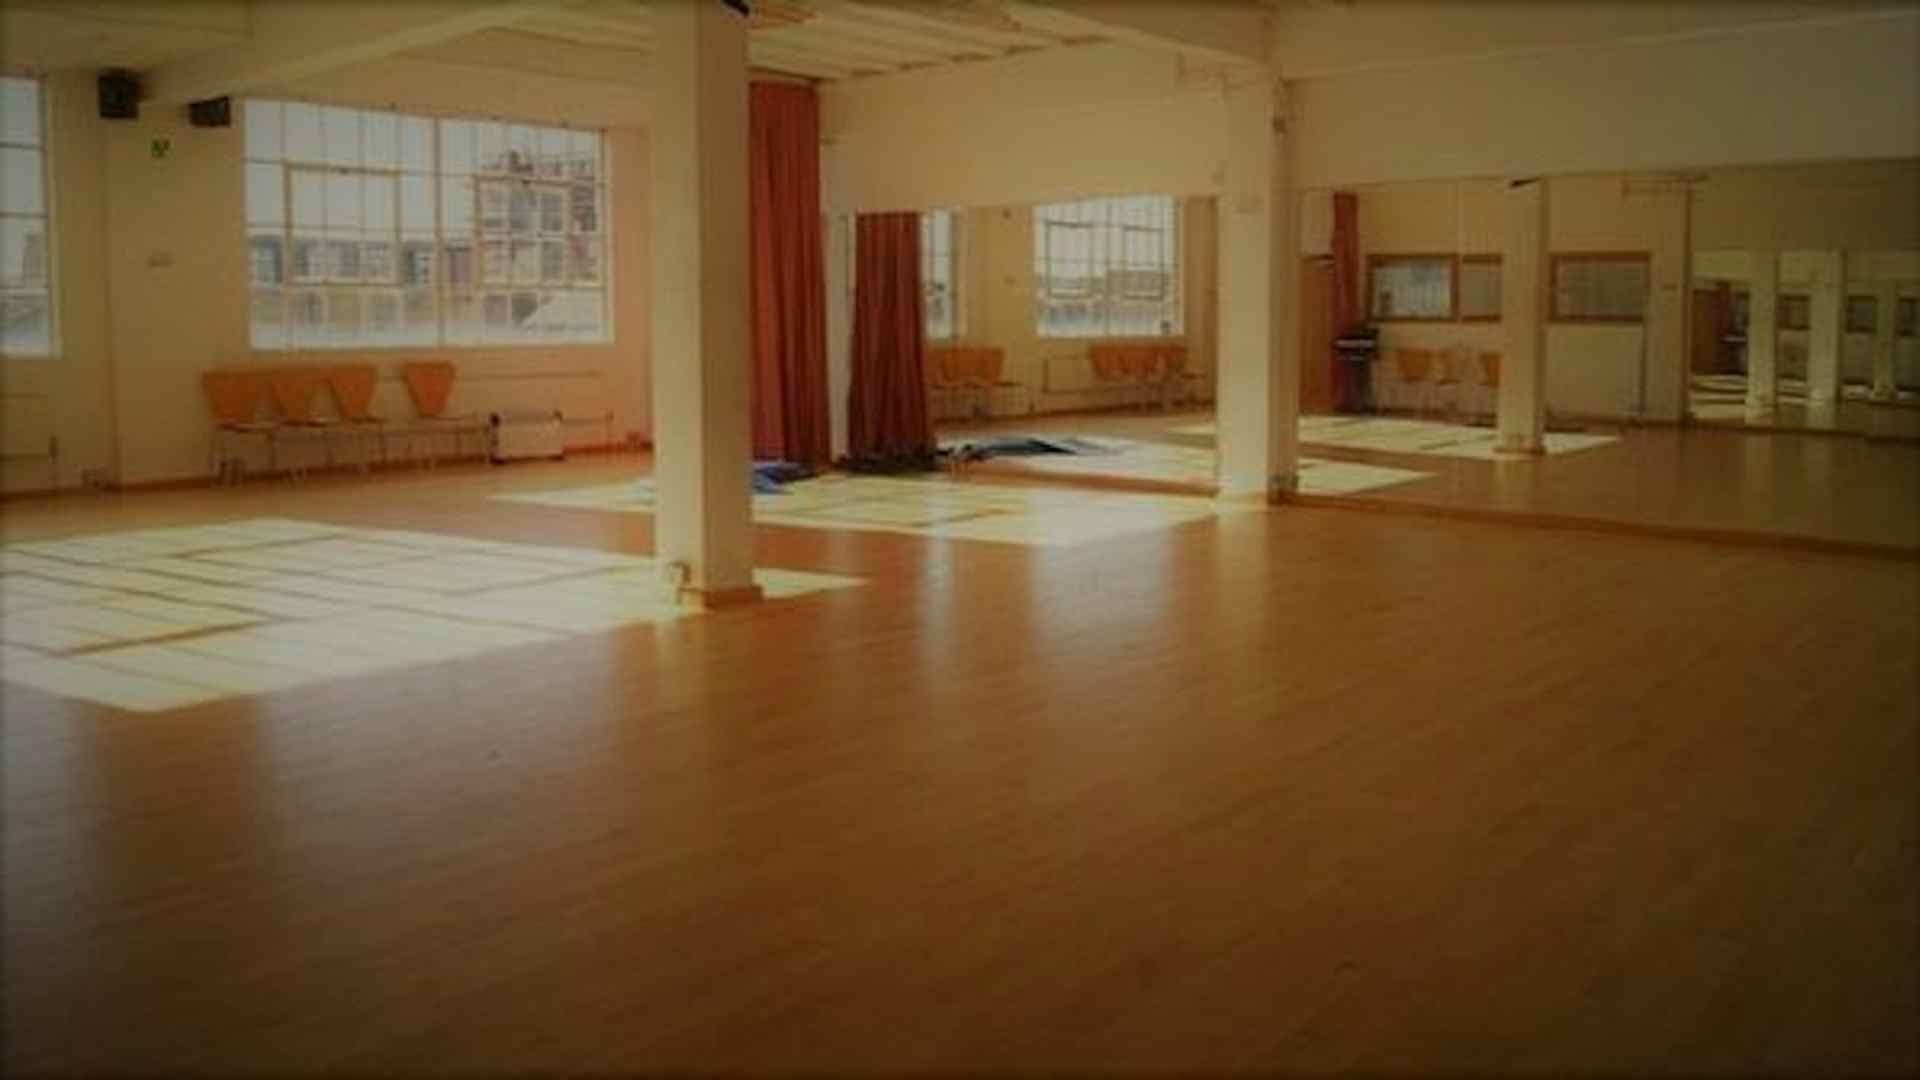 5 Rehearsal Spaces For Hire In London